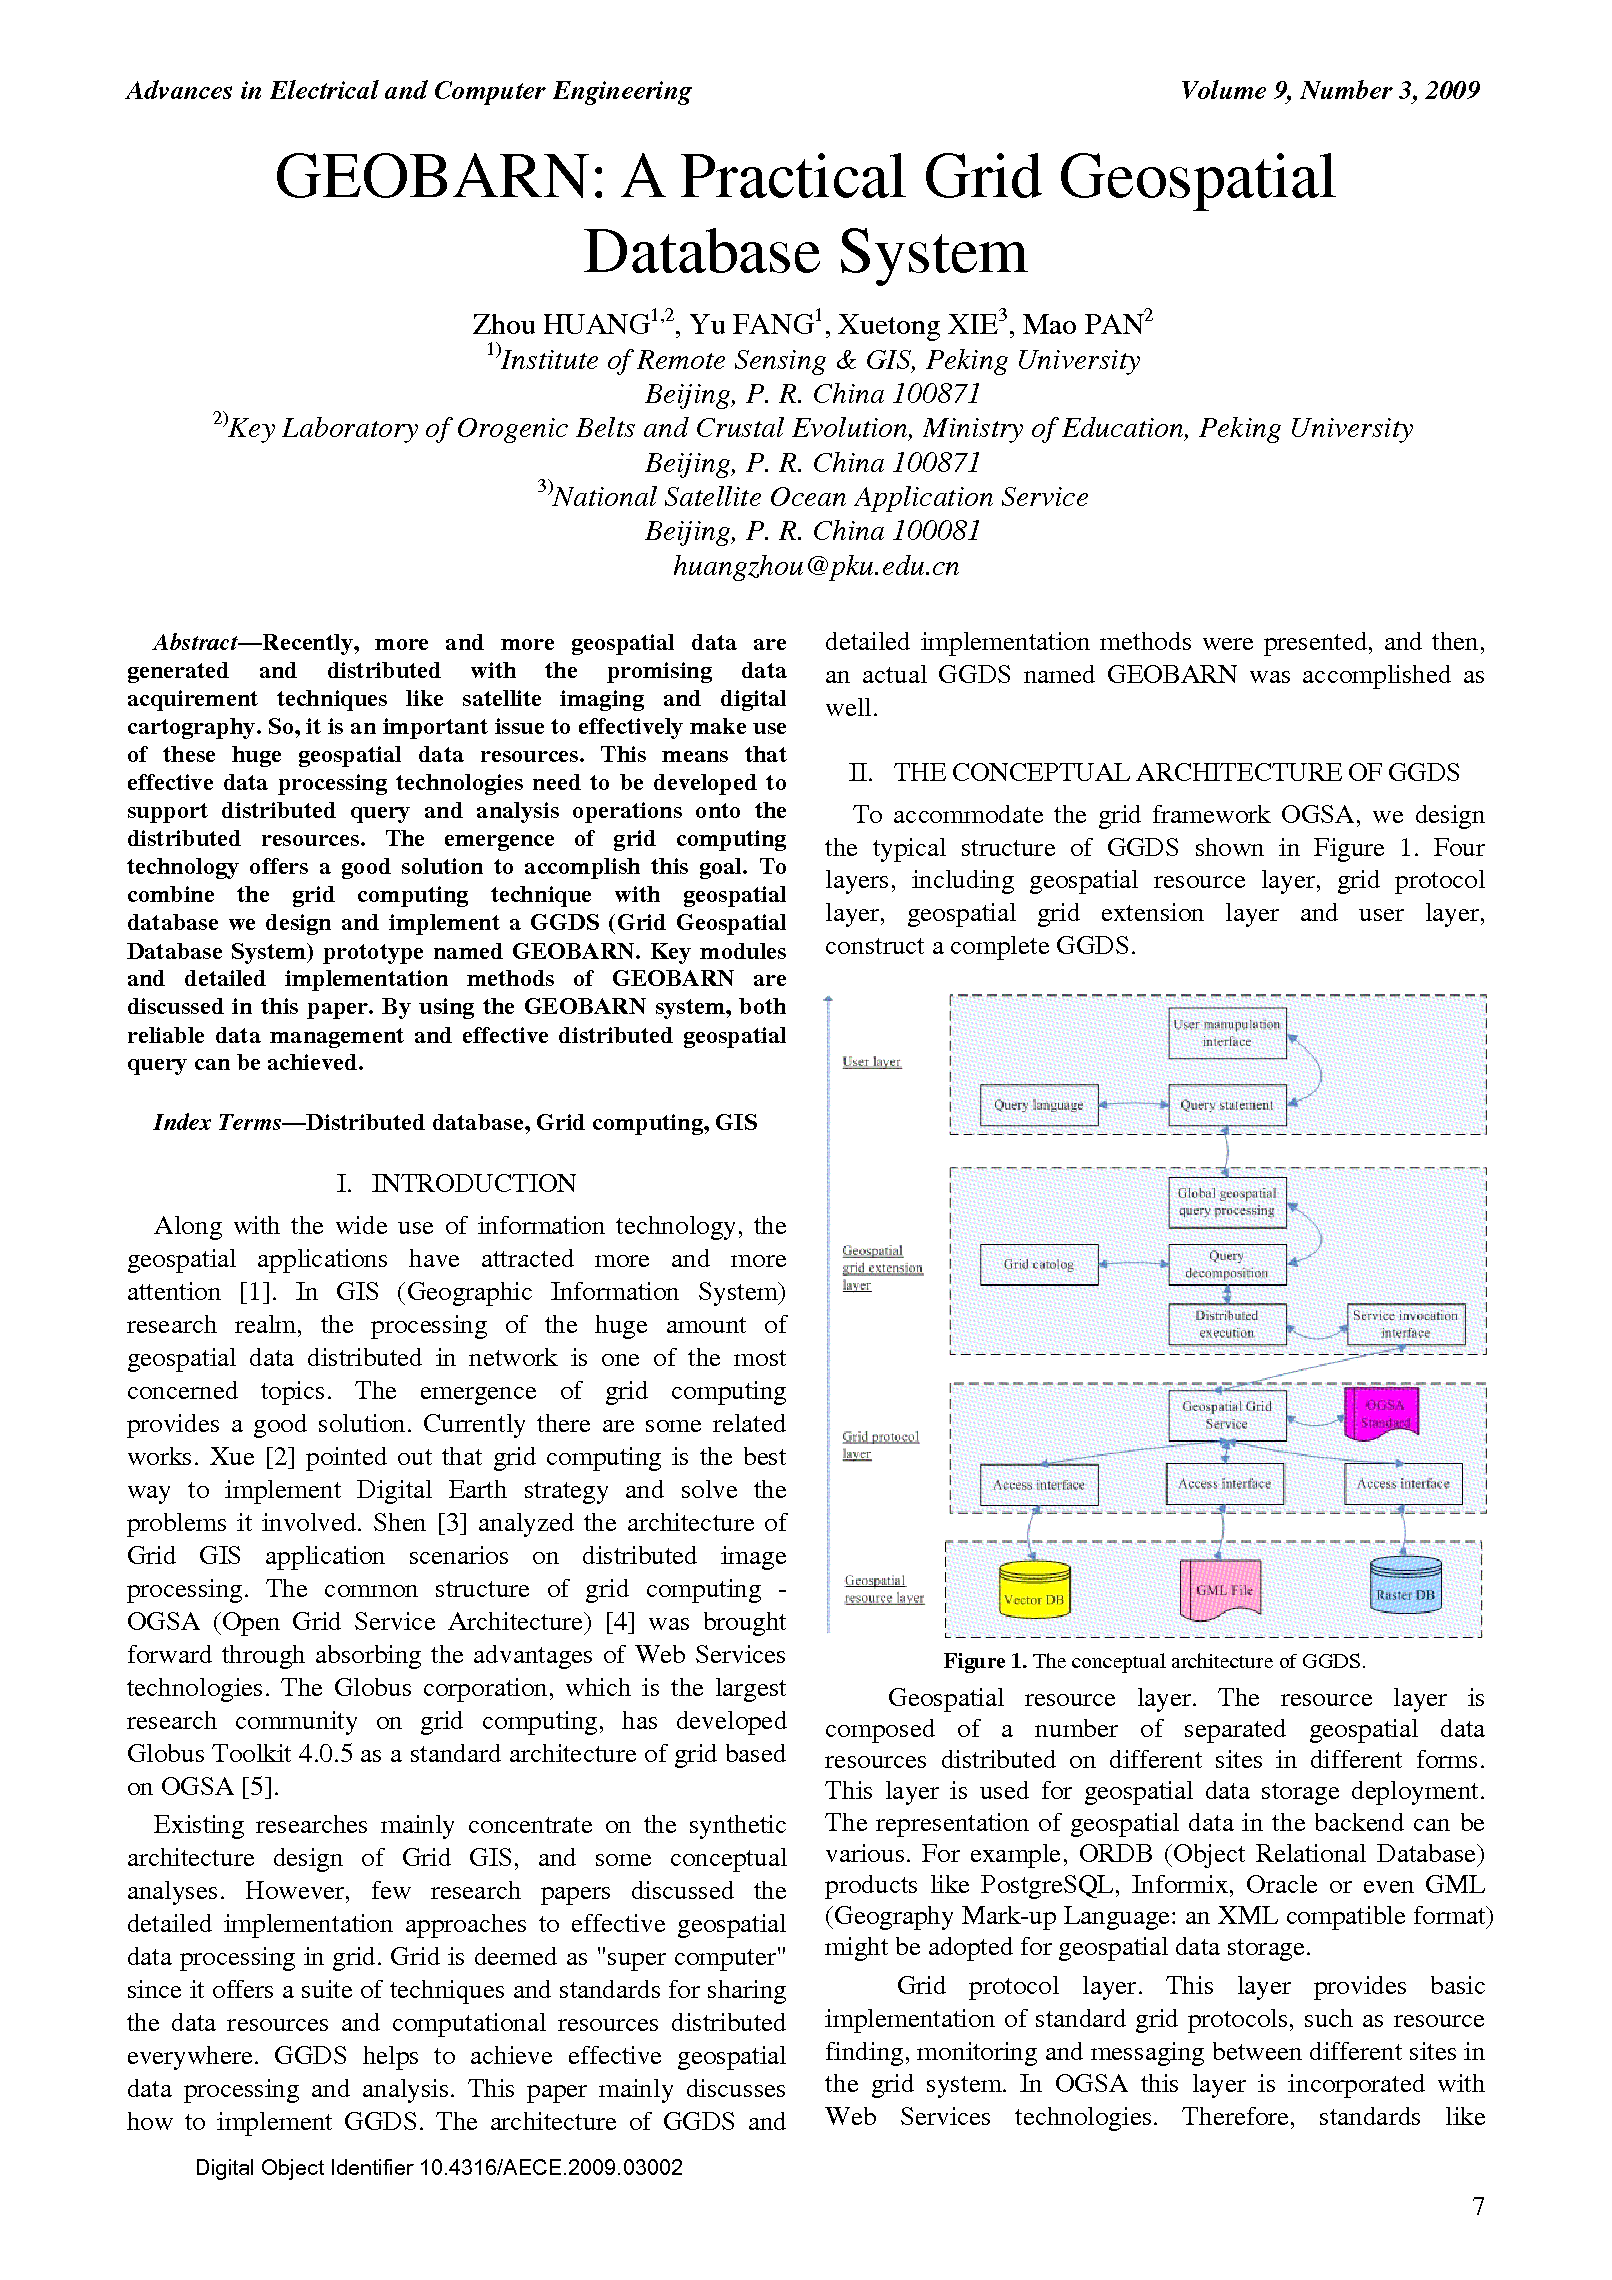 PDF Quickview for paper with DOI:10.4316/AECE.2009.03002